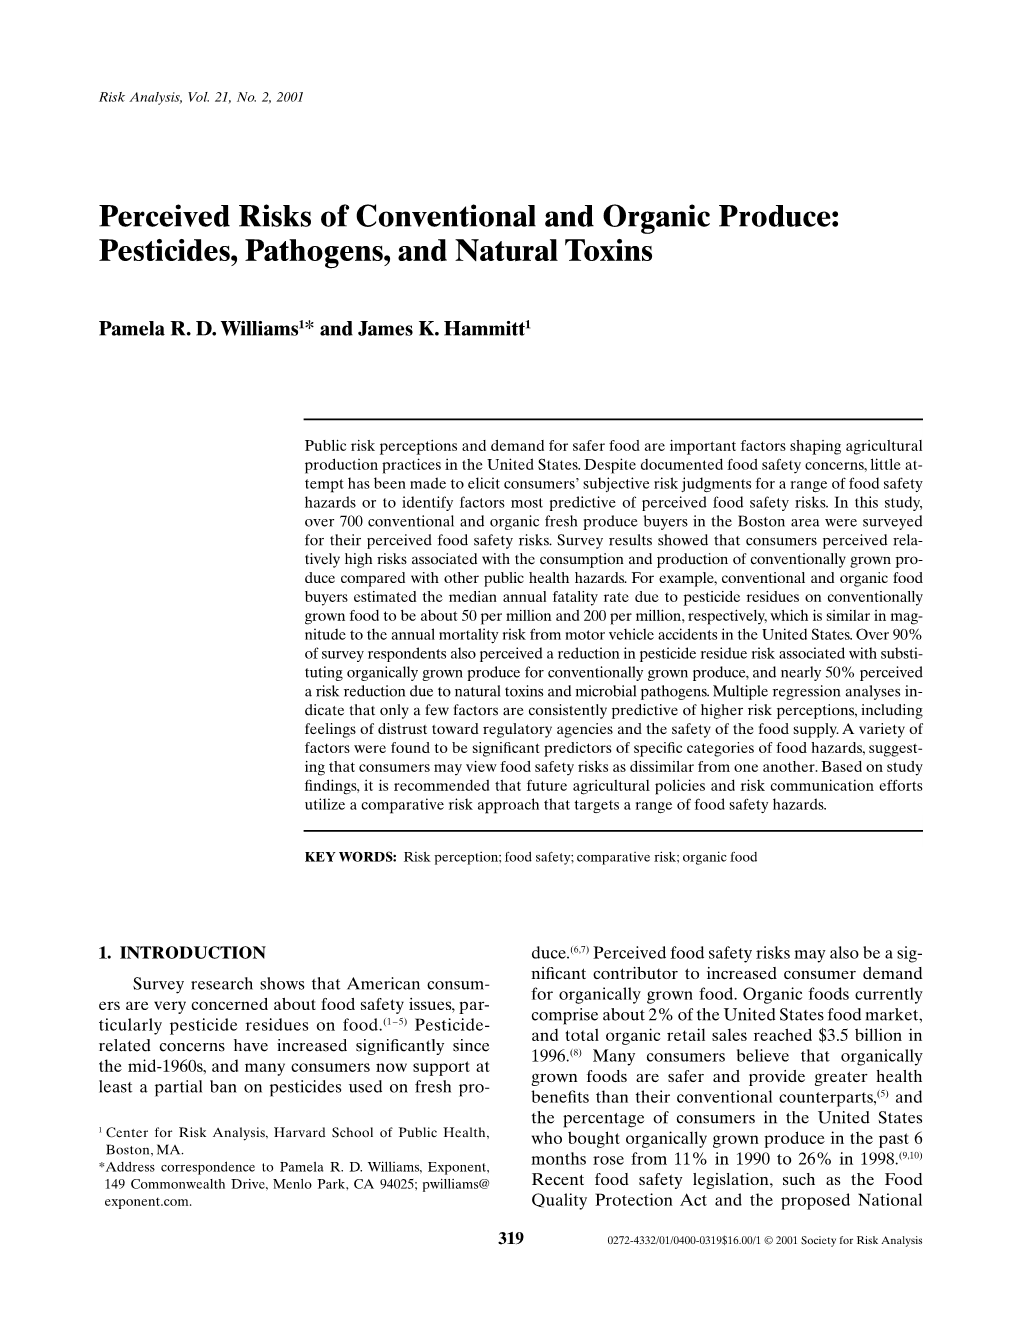 Perceived Risks of Conventional and Organic Produce: Pesticides, Pathogens, and Natural Toxins